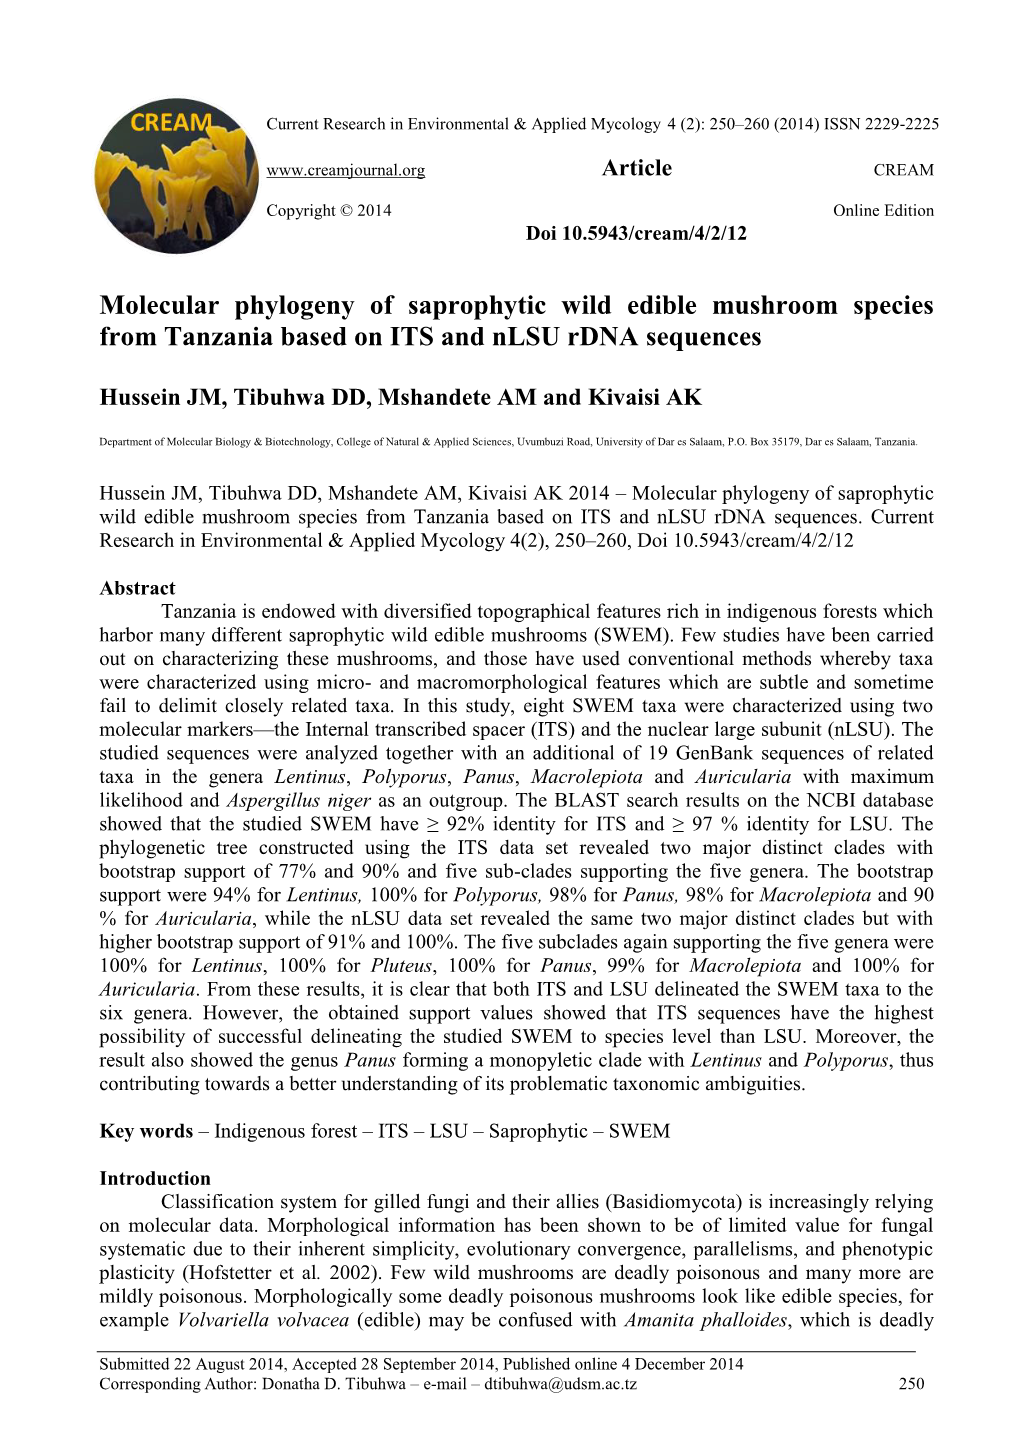 Molecular Phylogeny of Saprophytic Wild Edible Mushroom Species from Tanzania Based on ITS and Nlsu Rdna Sequences